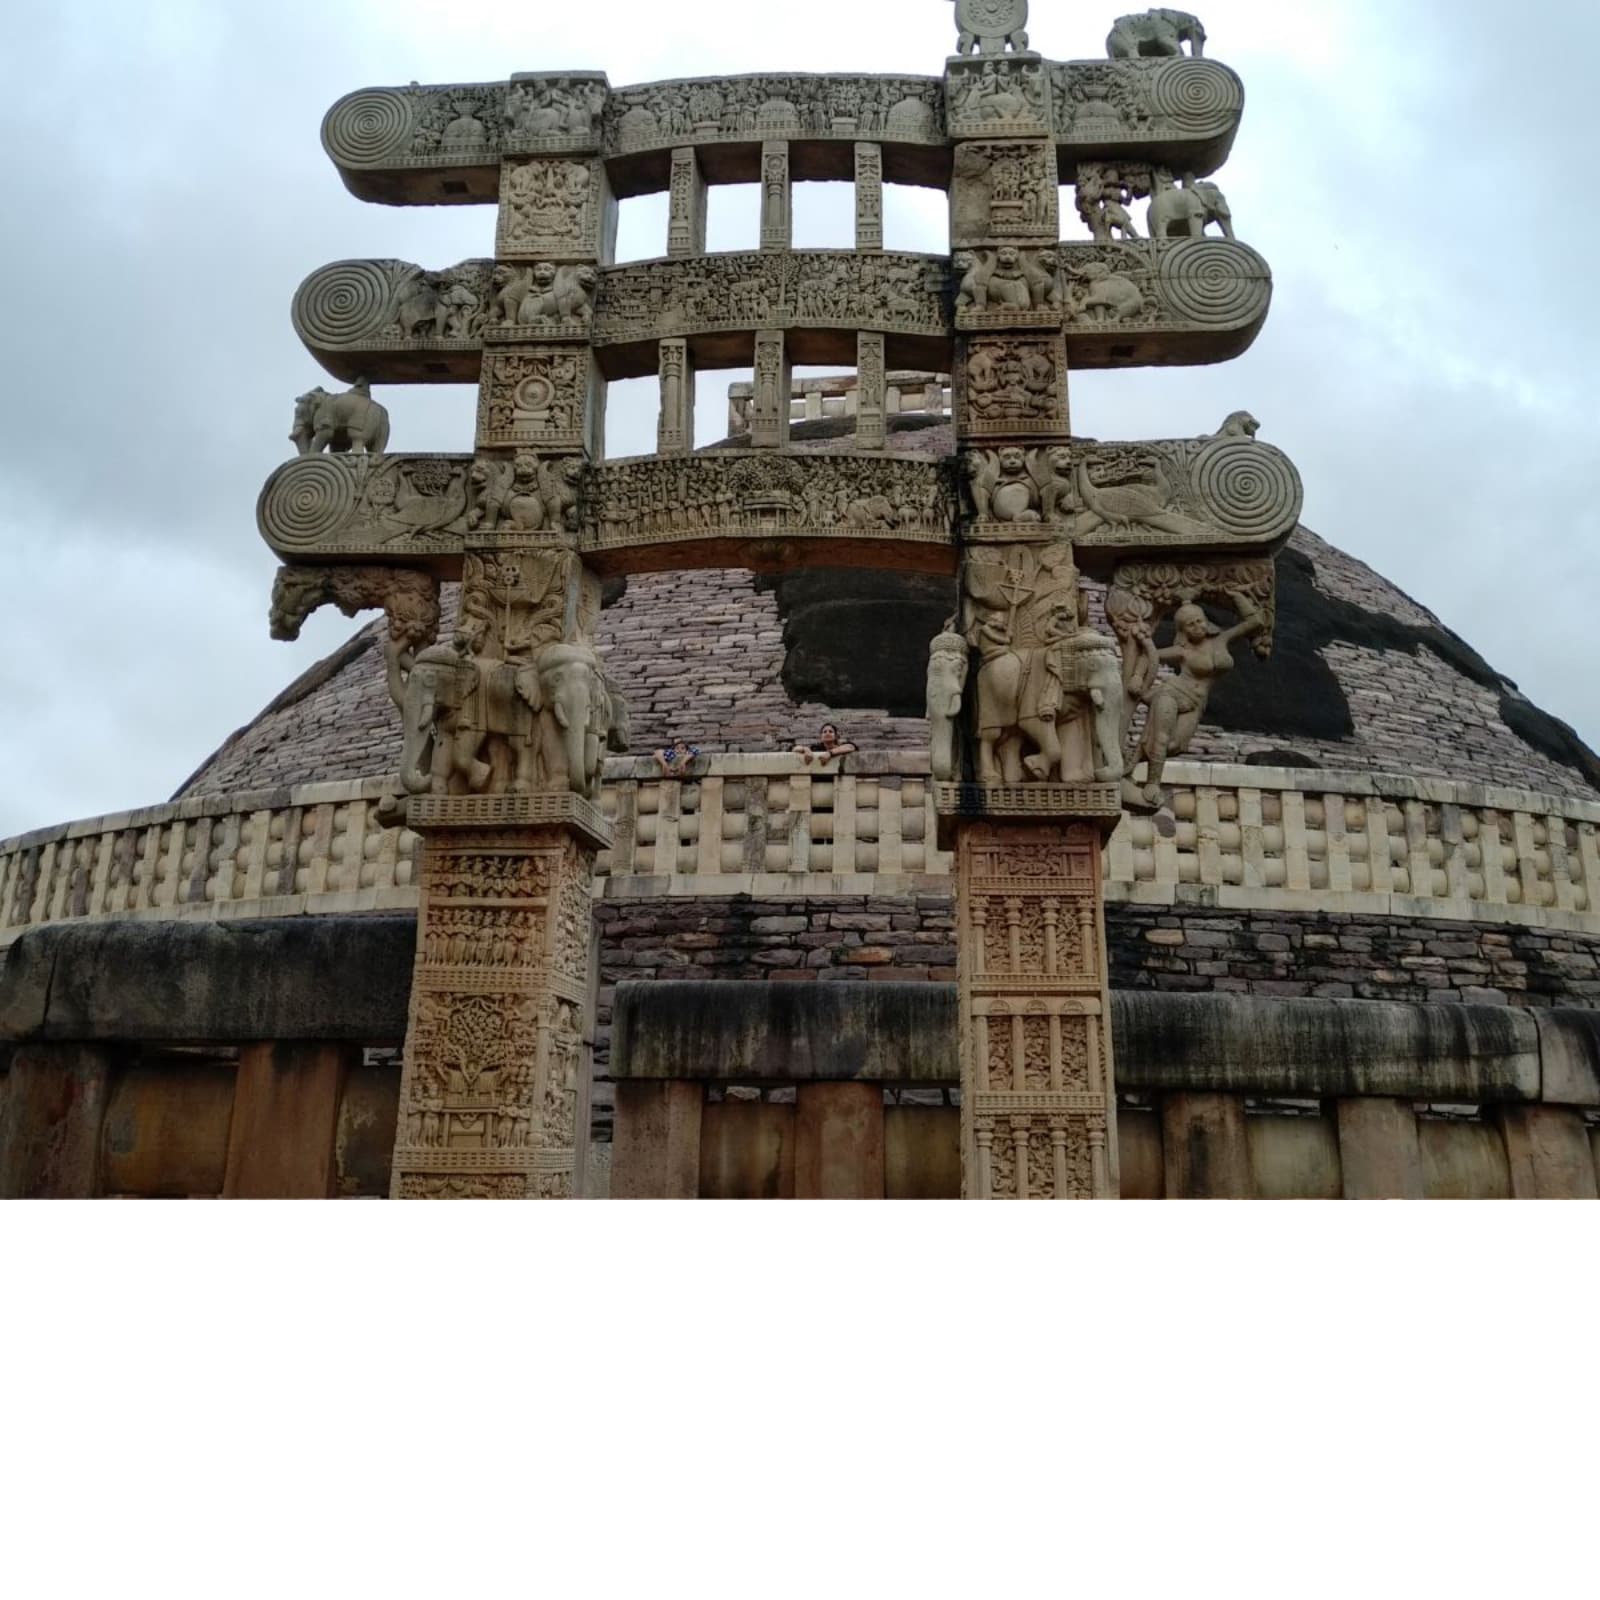 sanchi stupa is made up of which rock